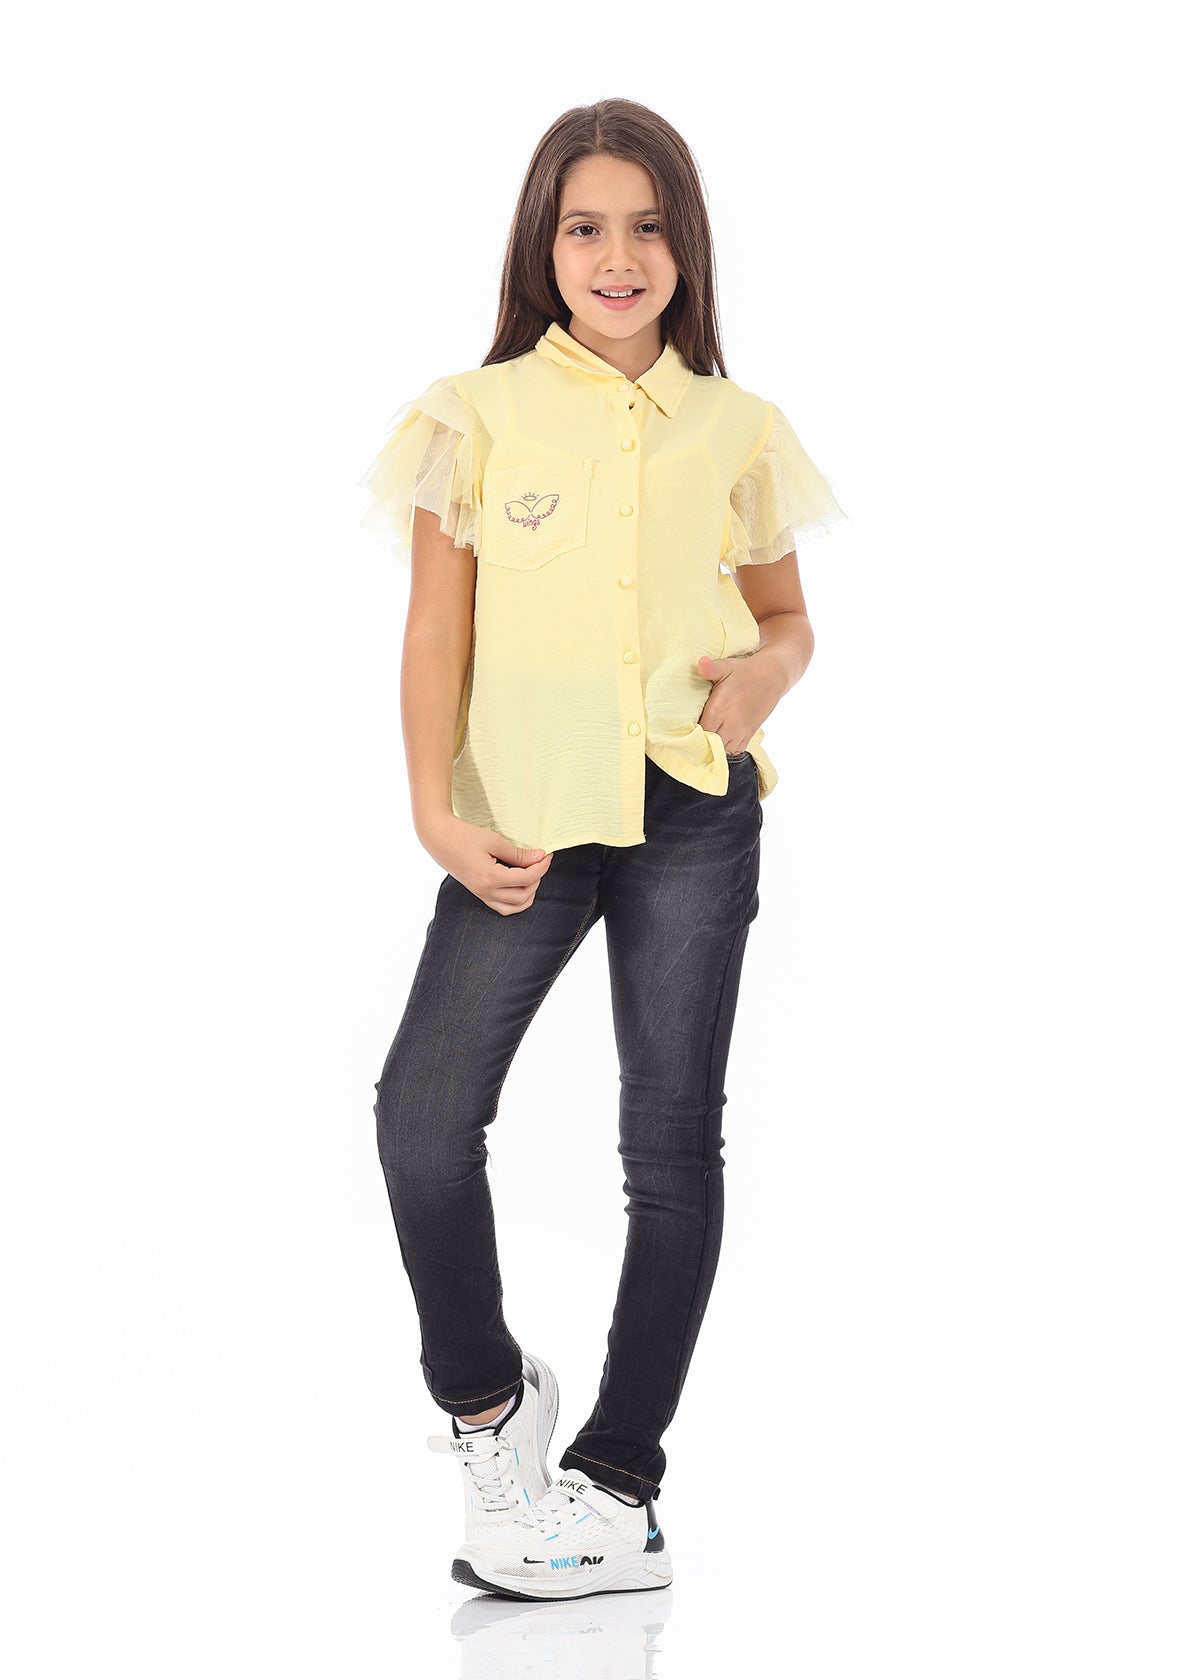 Yellow Short Sleeves Shirt With Print For Girls